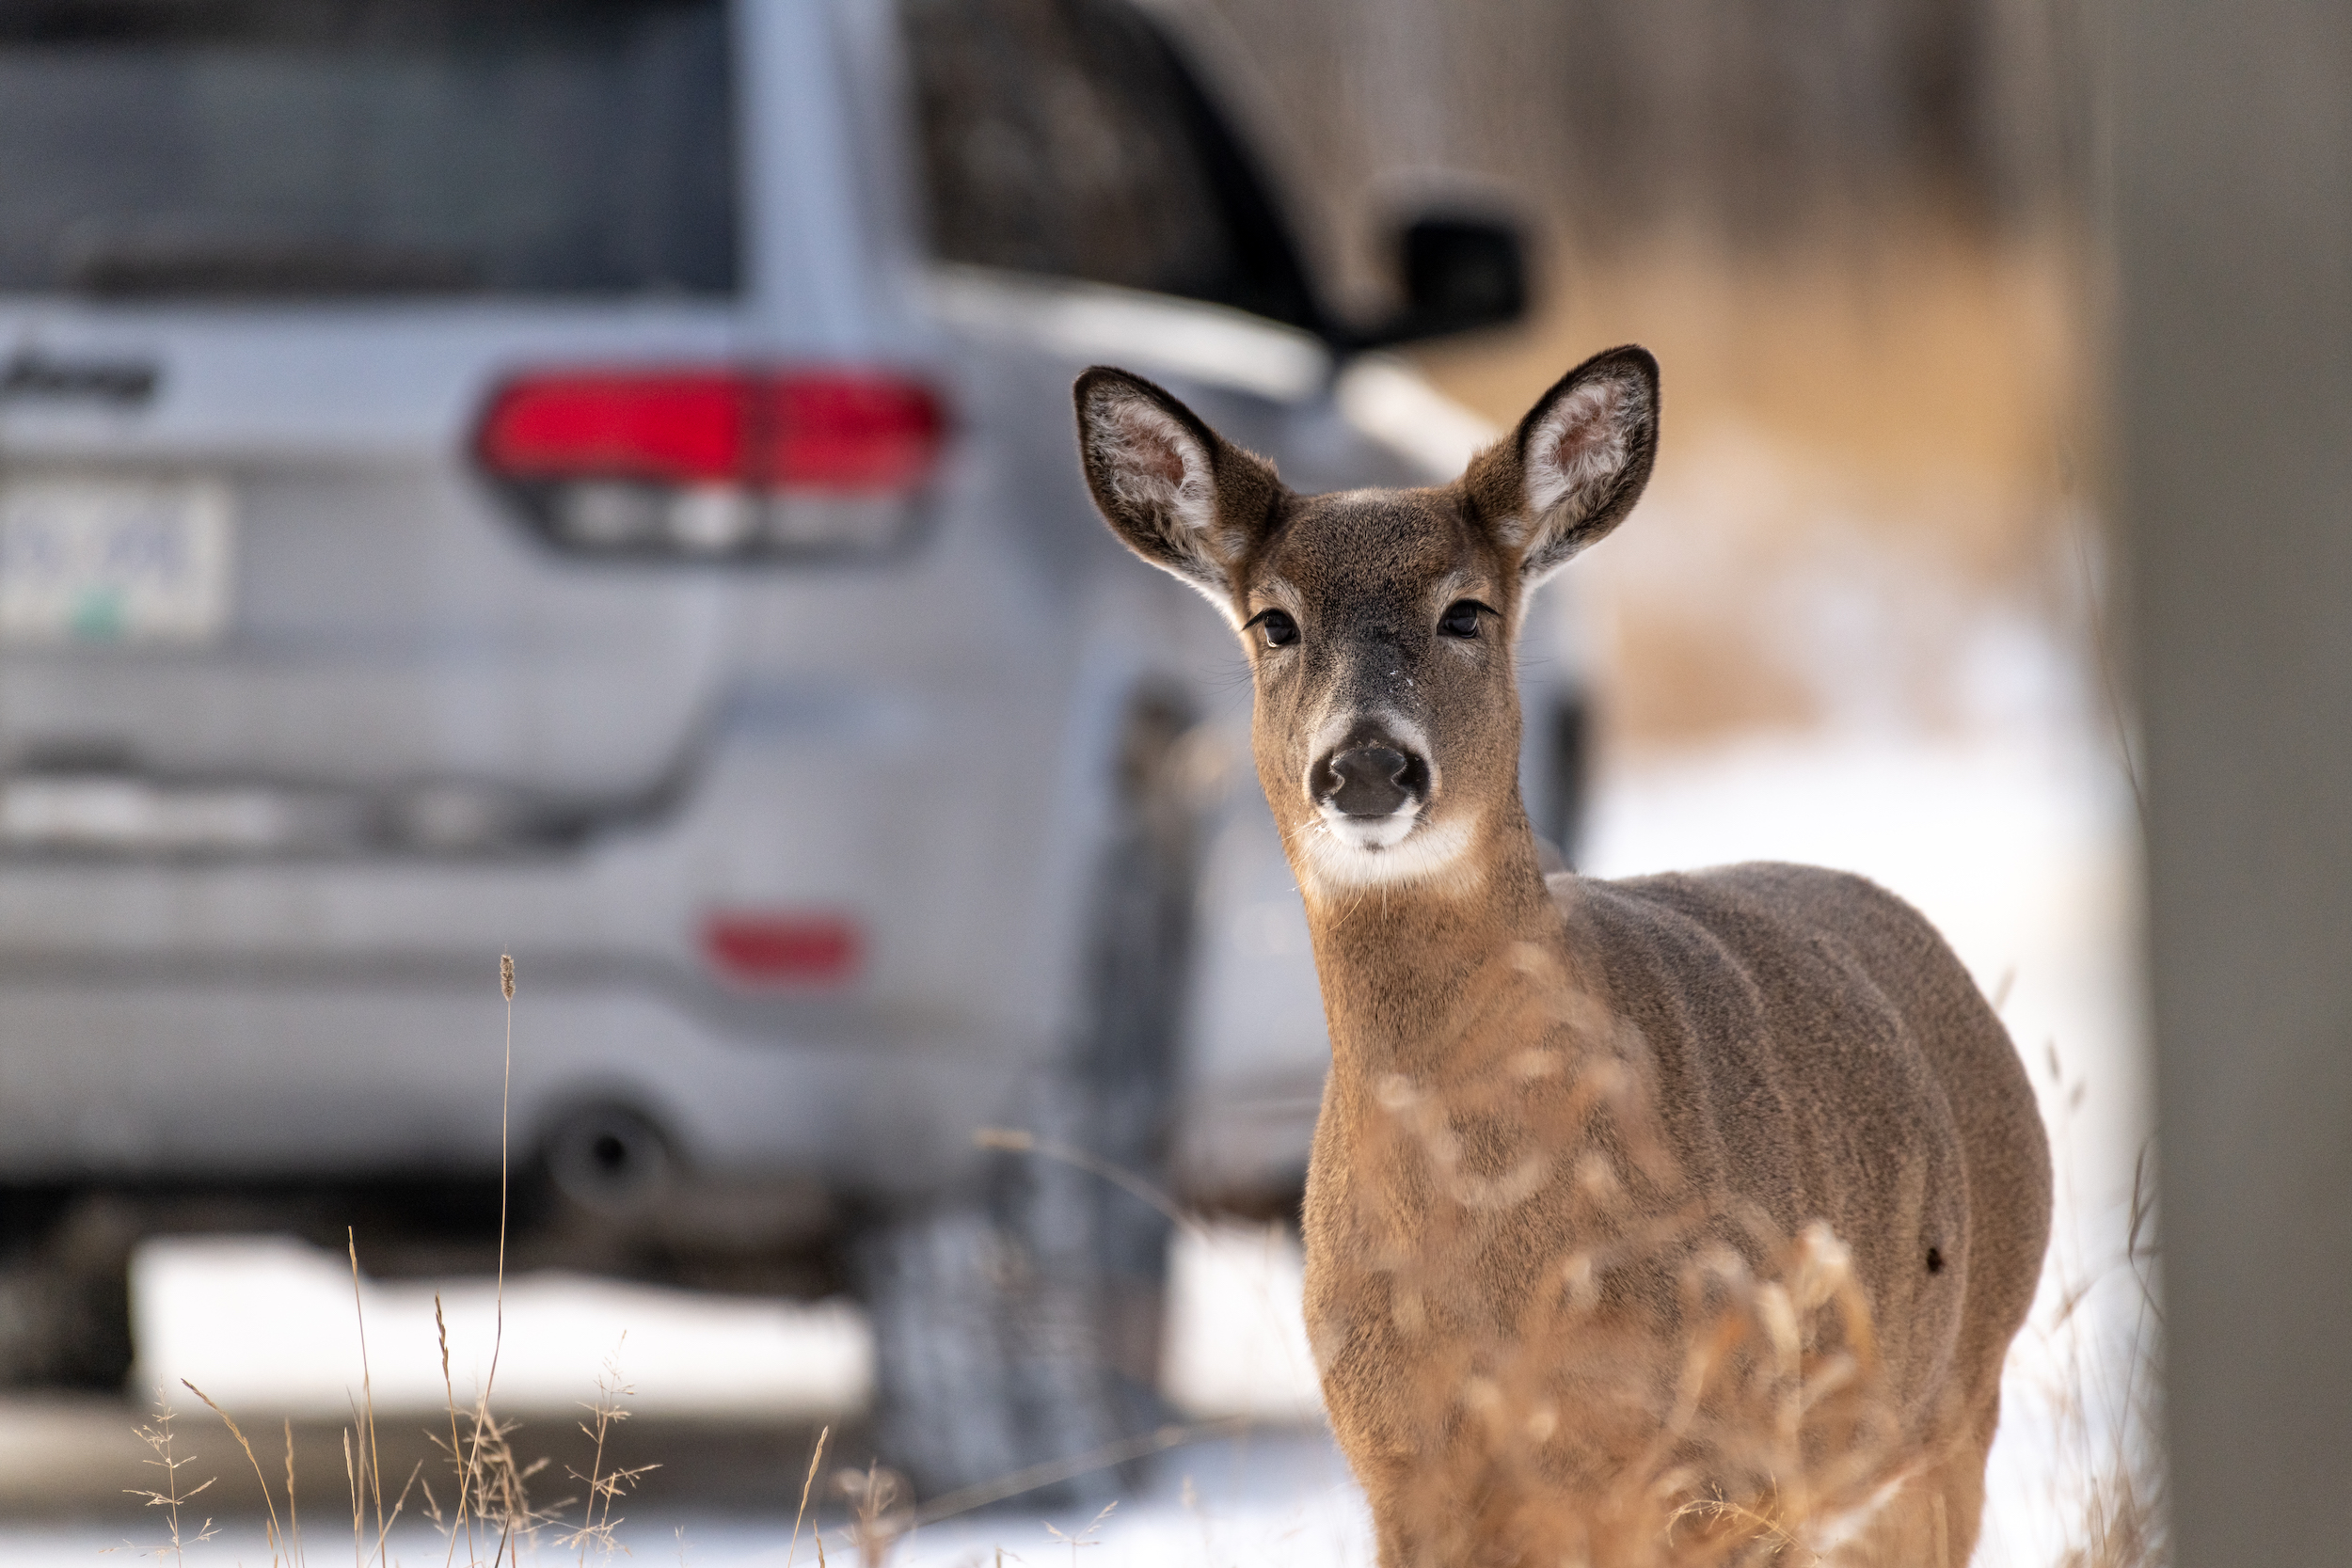 Feeding deer on Mission Island is a Thunder Bay ritual but scientists say it poses multiple risks for wildlife.